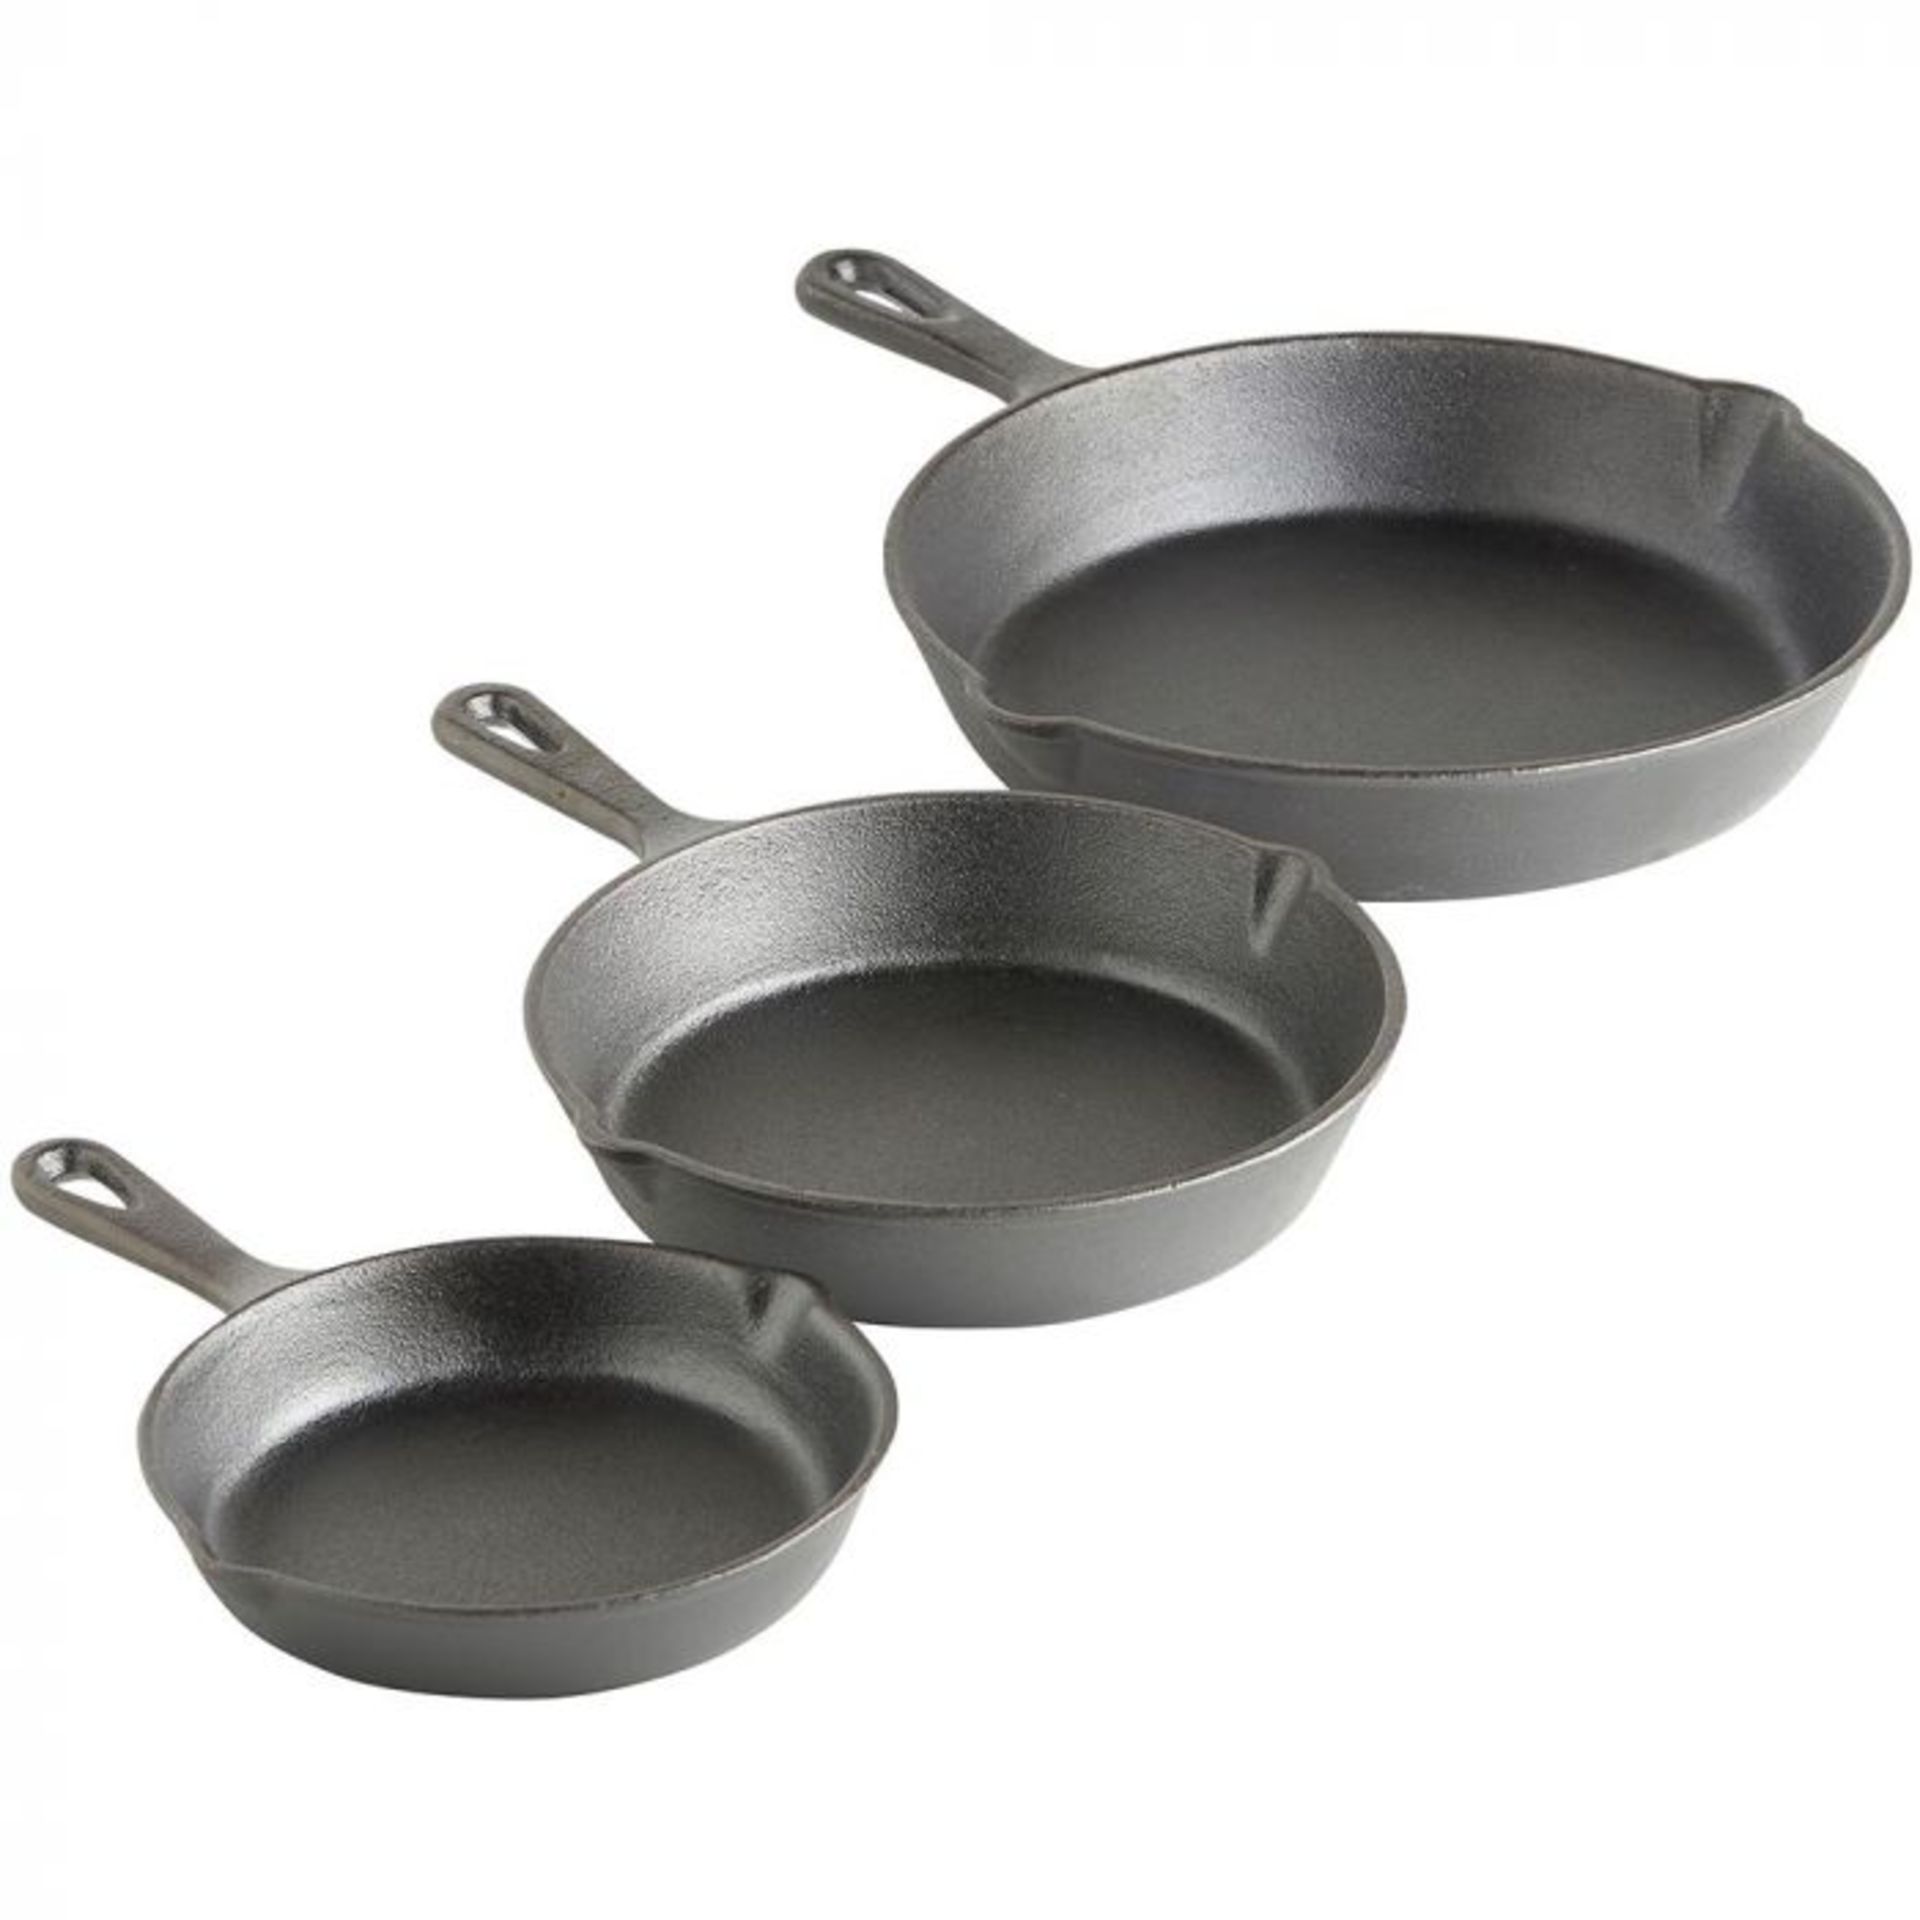 (S52) 3pc Cast Iron Skillet Set Traditional cast iron construction, Pre-seasoned with natural ... - Image 5 of 5